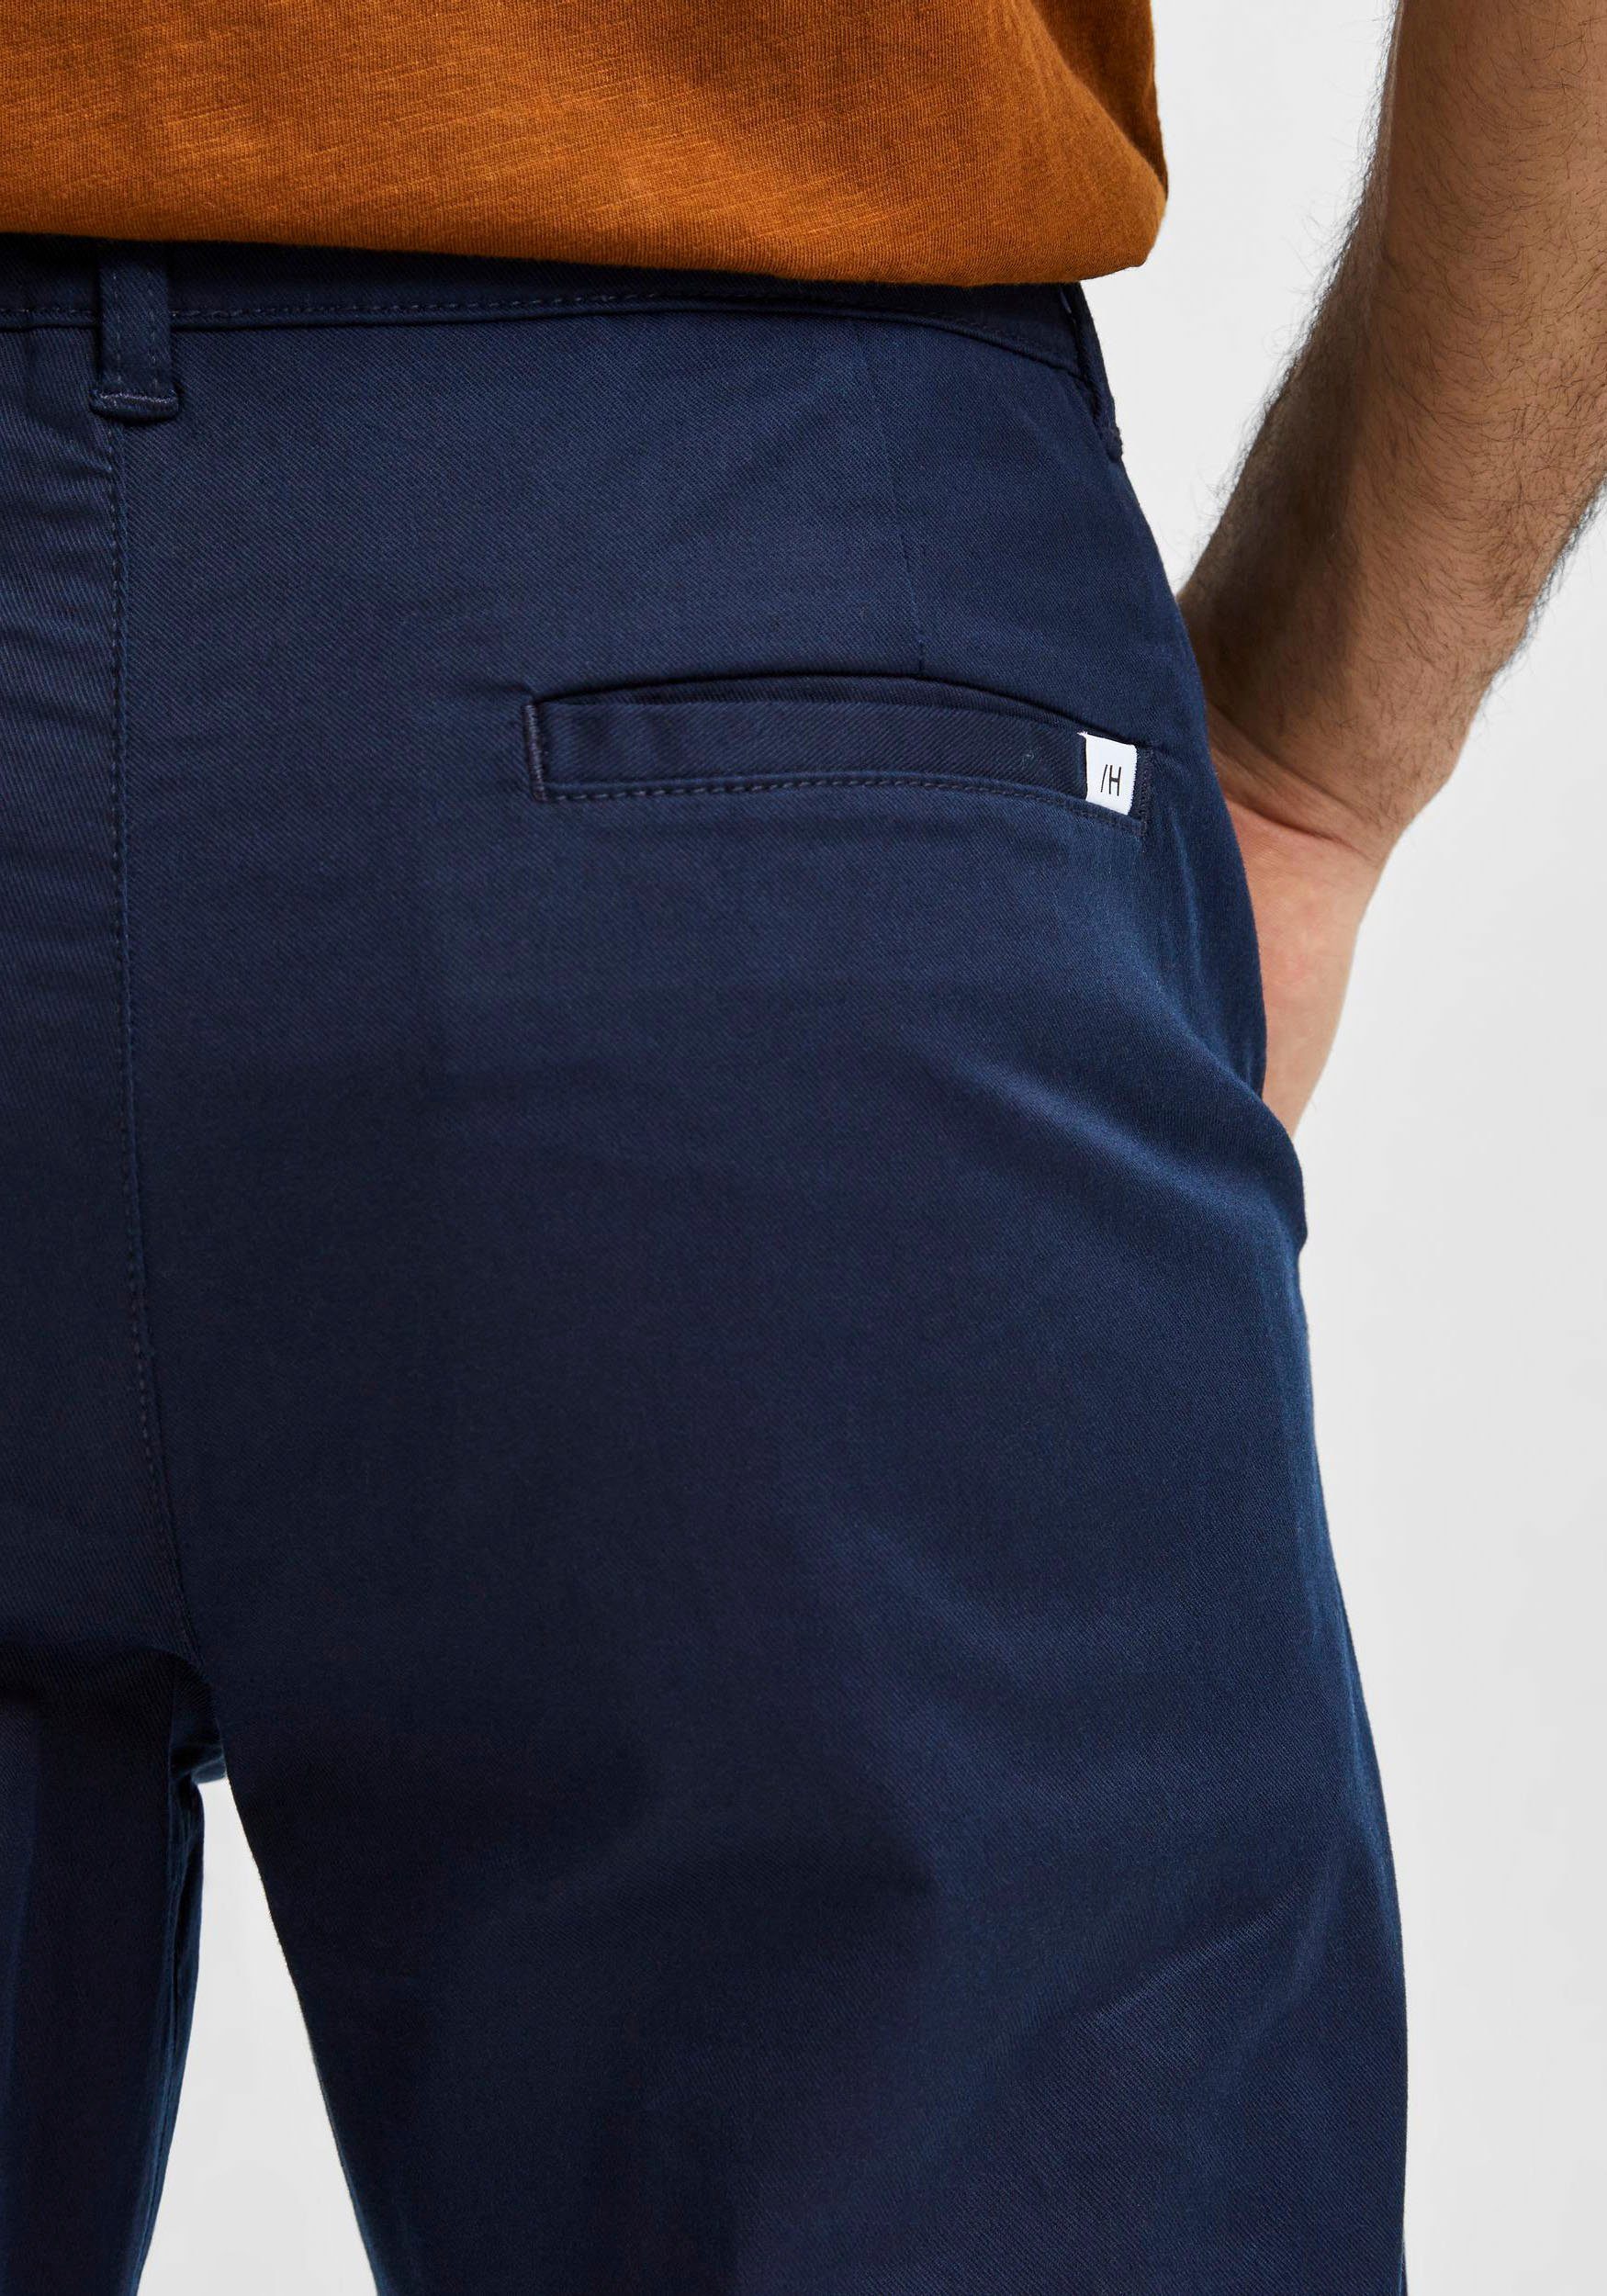 HOMME Sapphire Dark Chino Chinohose SE SELECTED